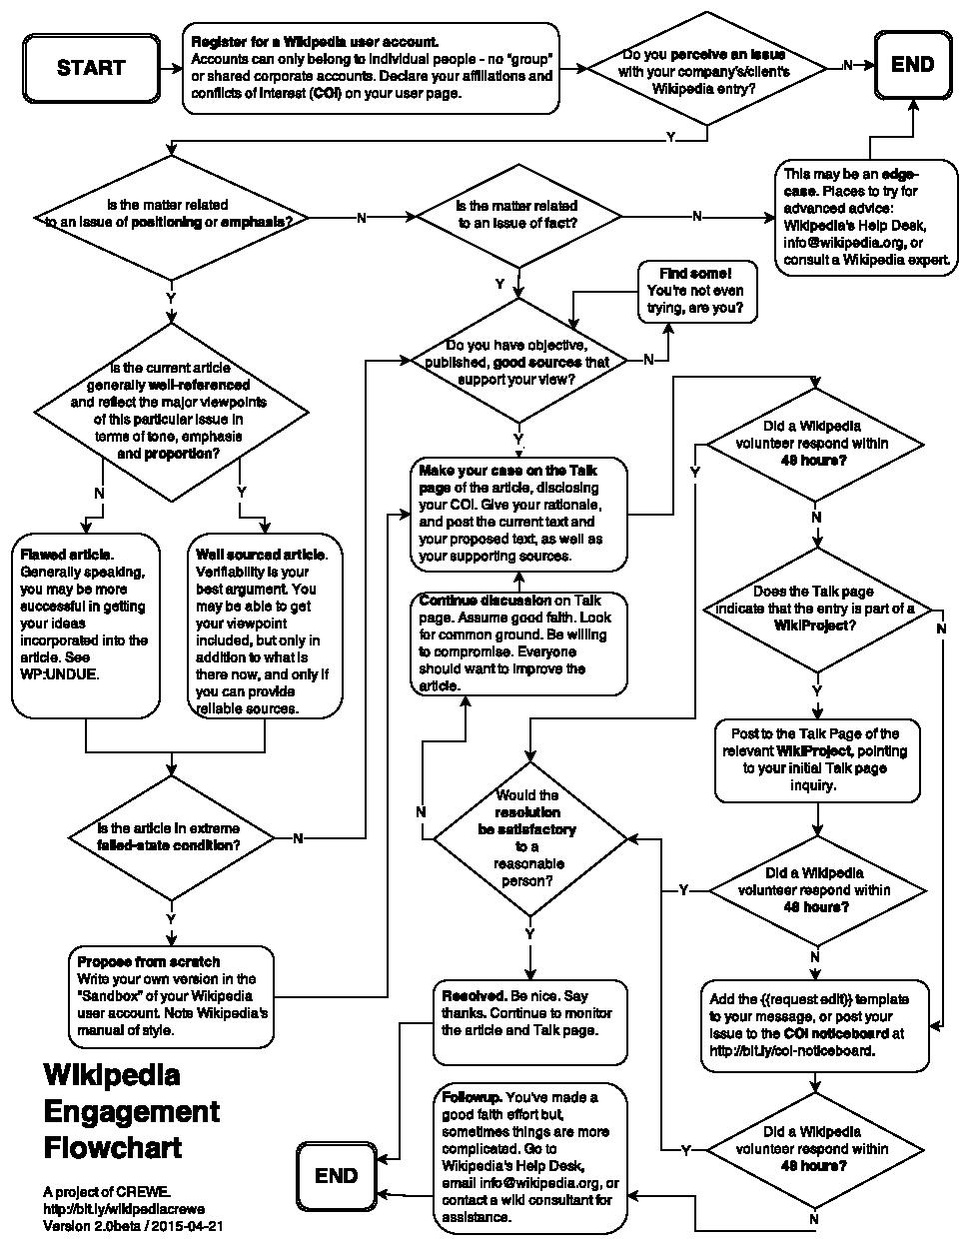 A chart showing PR professionals how to proerly edit a client's Wikipedia pge.